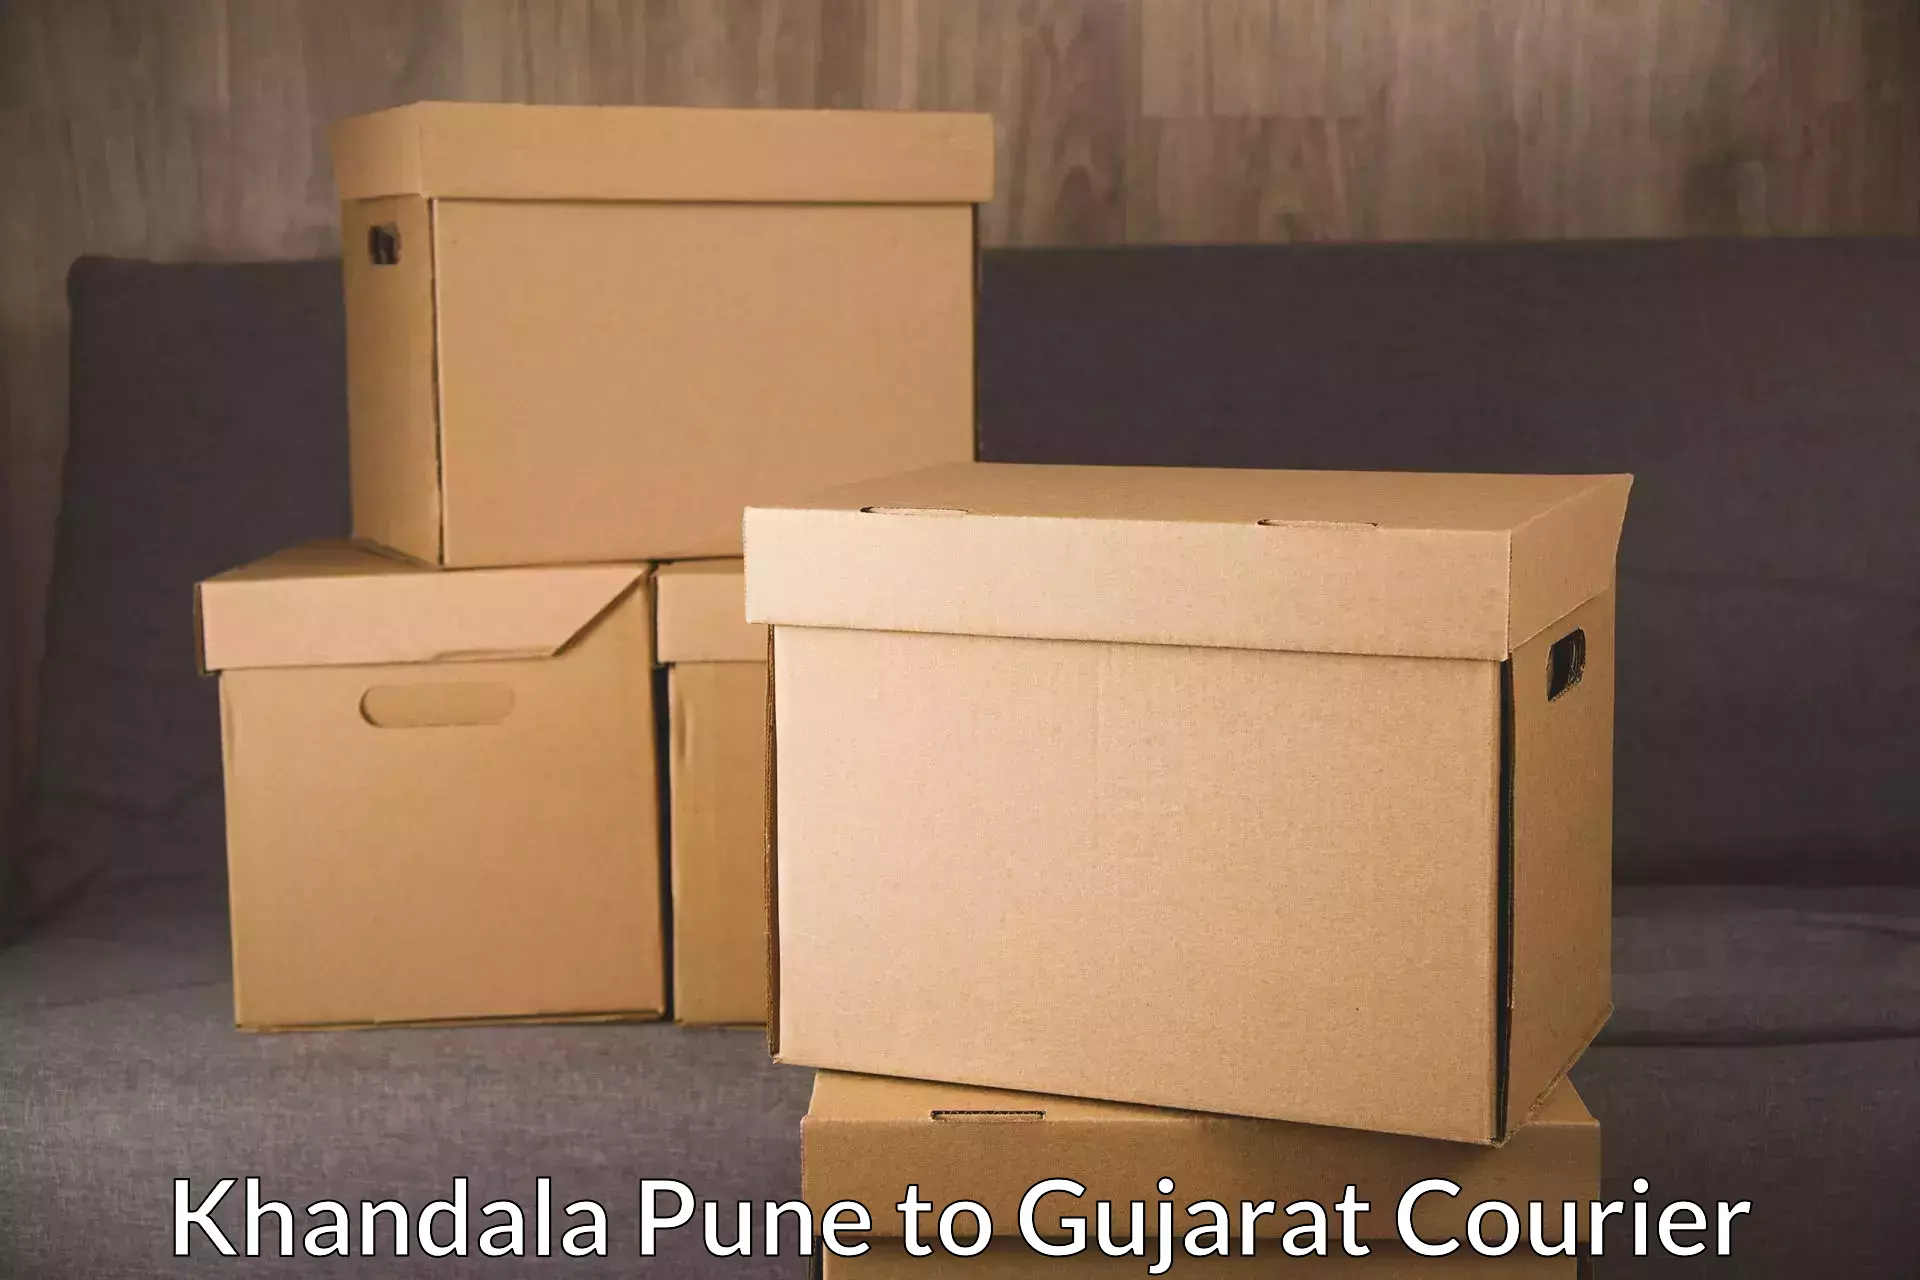 On-call courier service Khandala Pune to Morbi